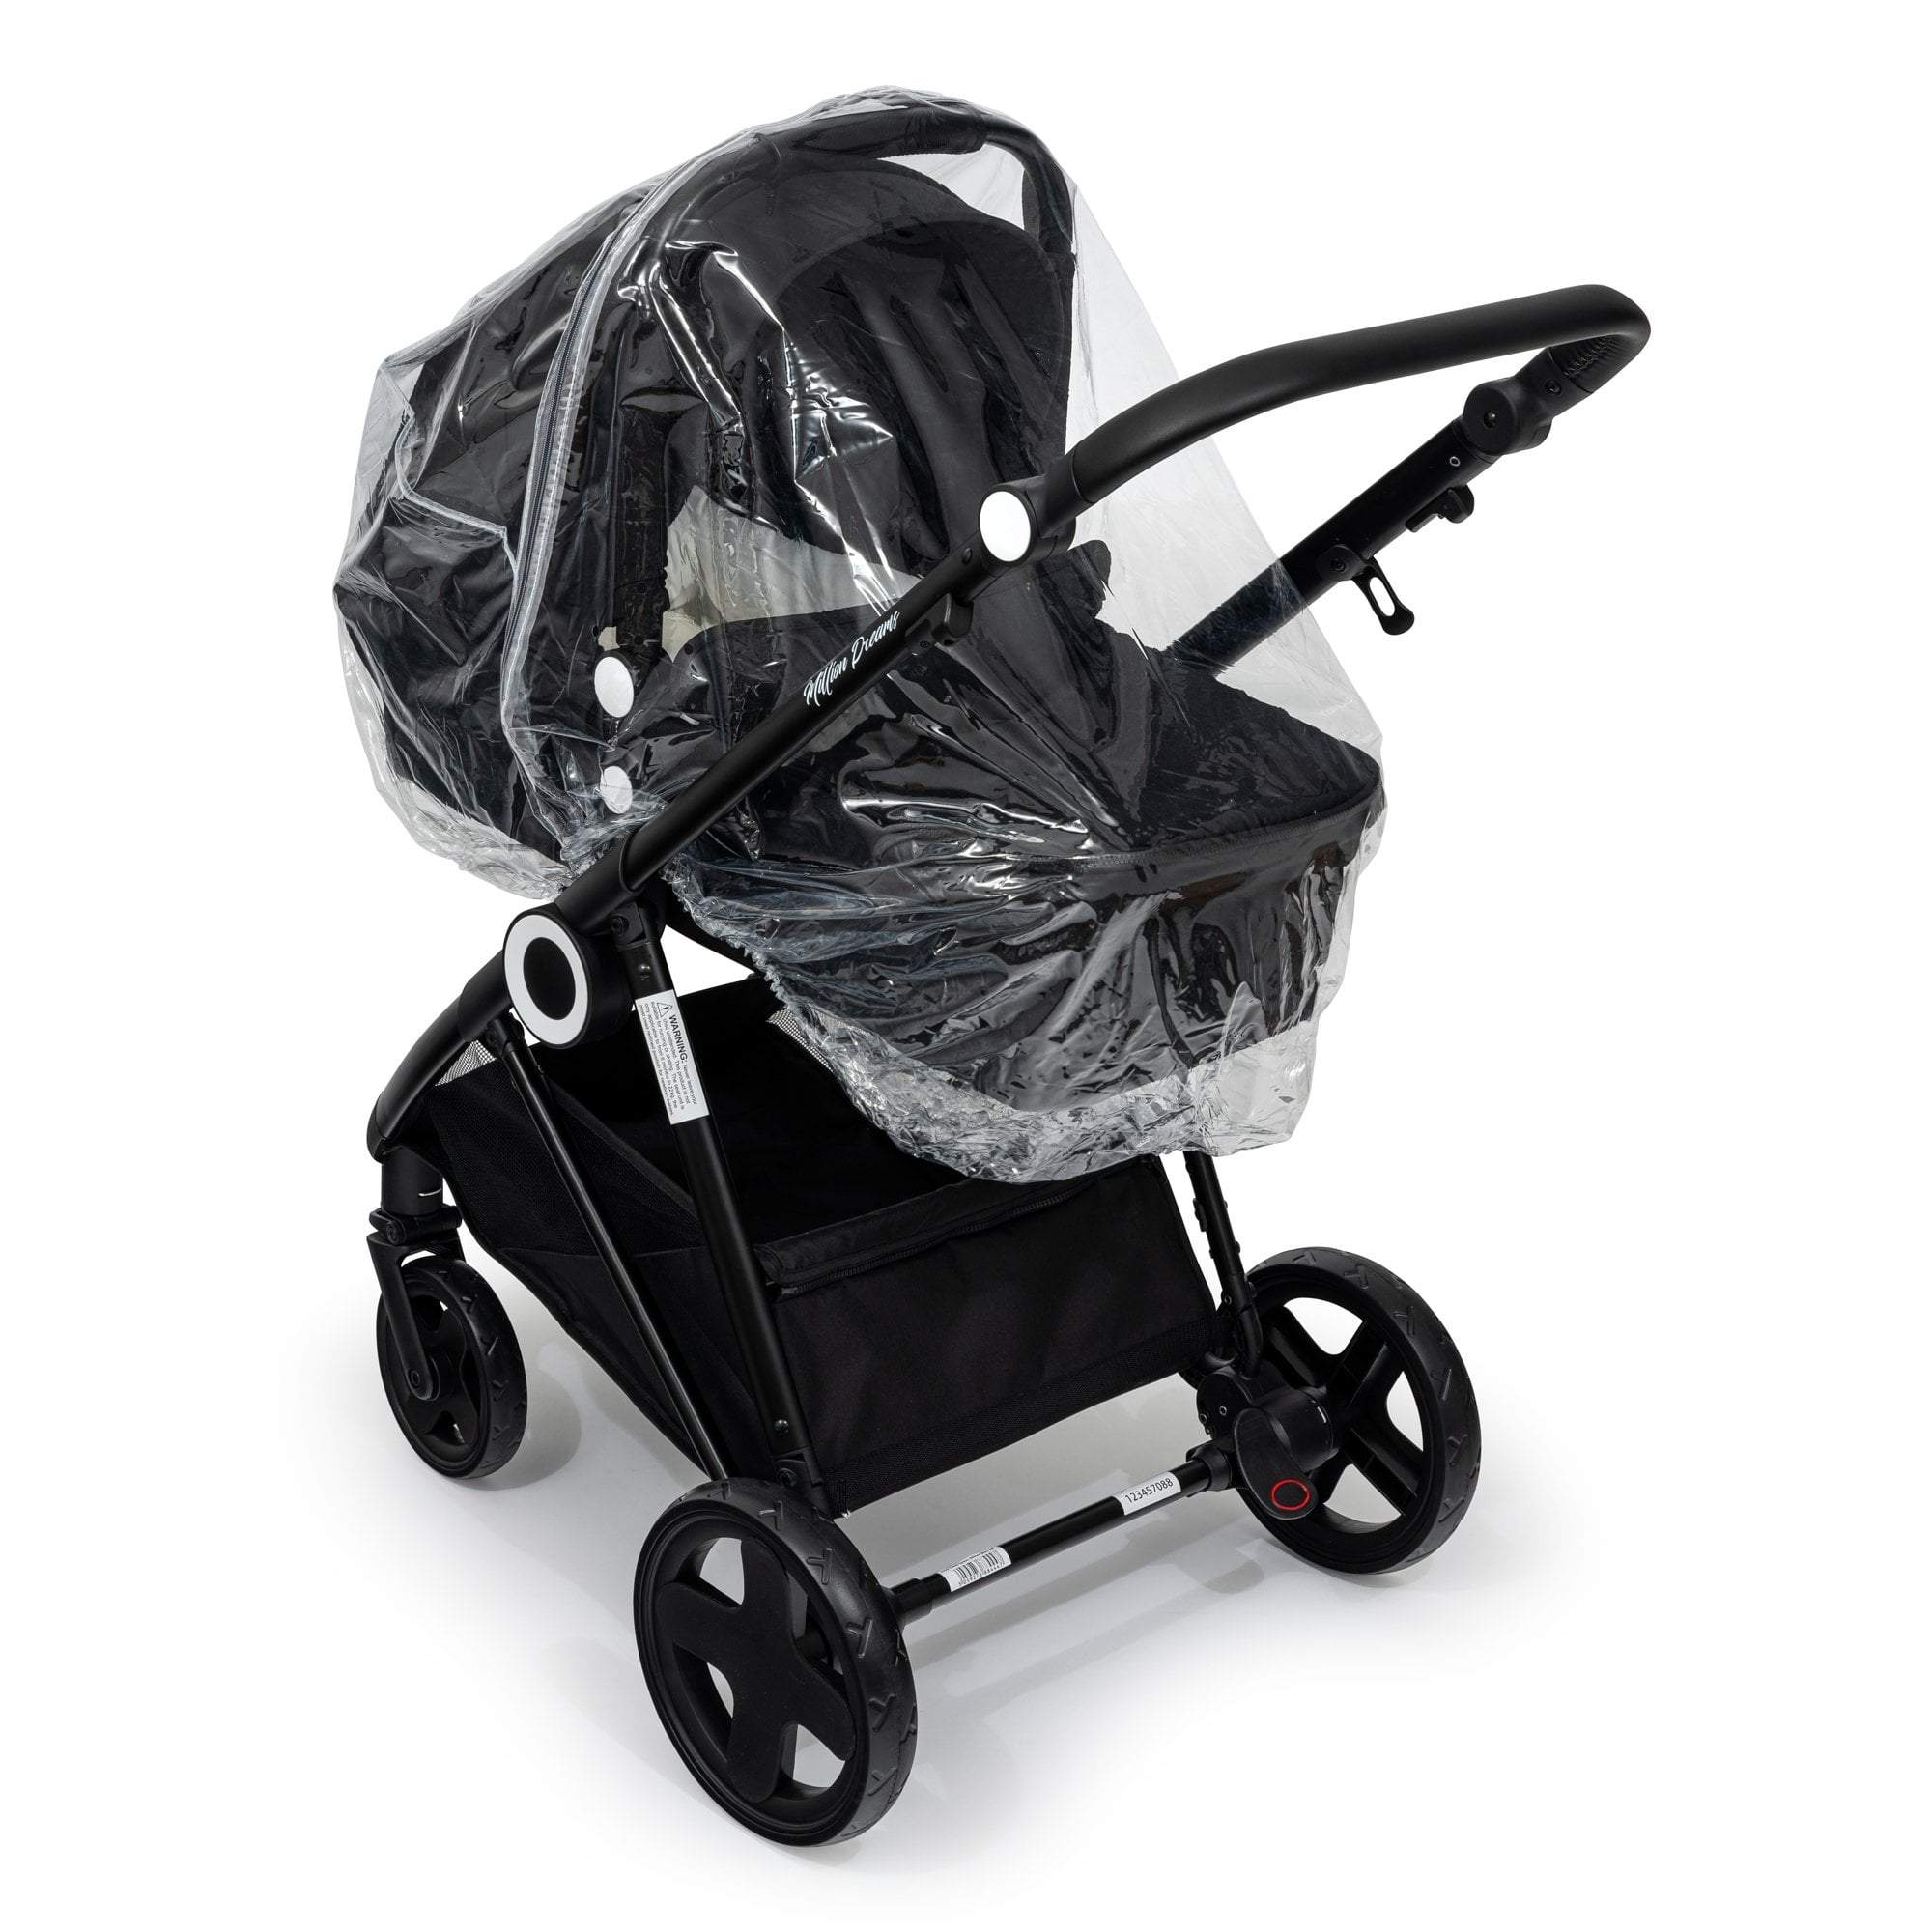 Carrycot Raincover Compatible With My Babiie - Fits All Models - For Your Little One